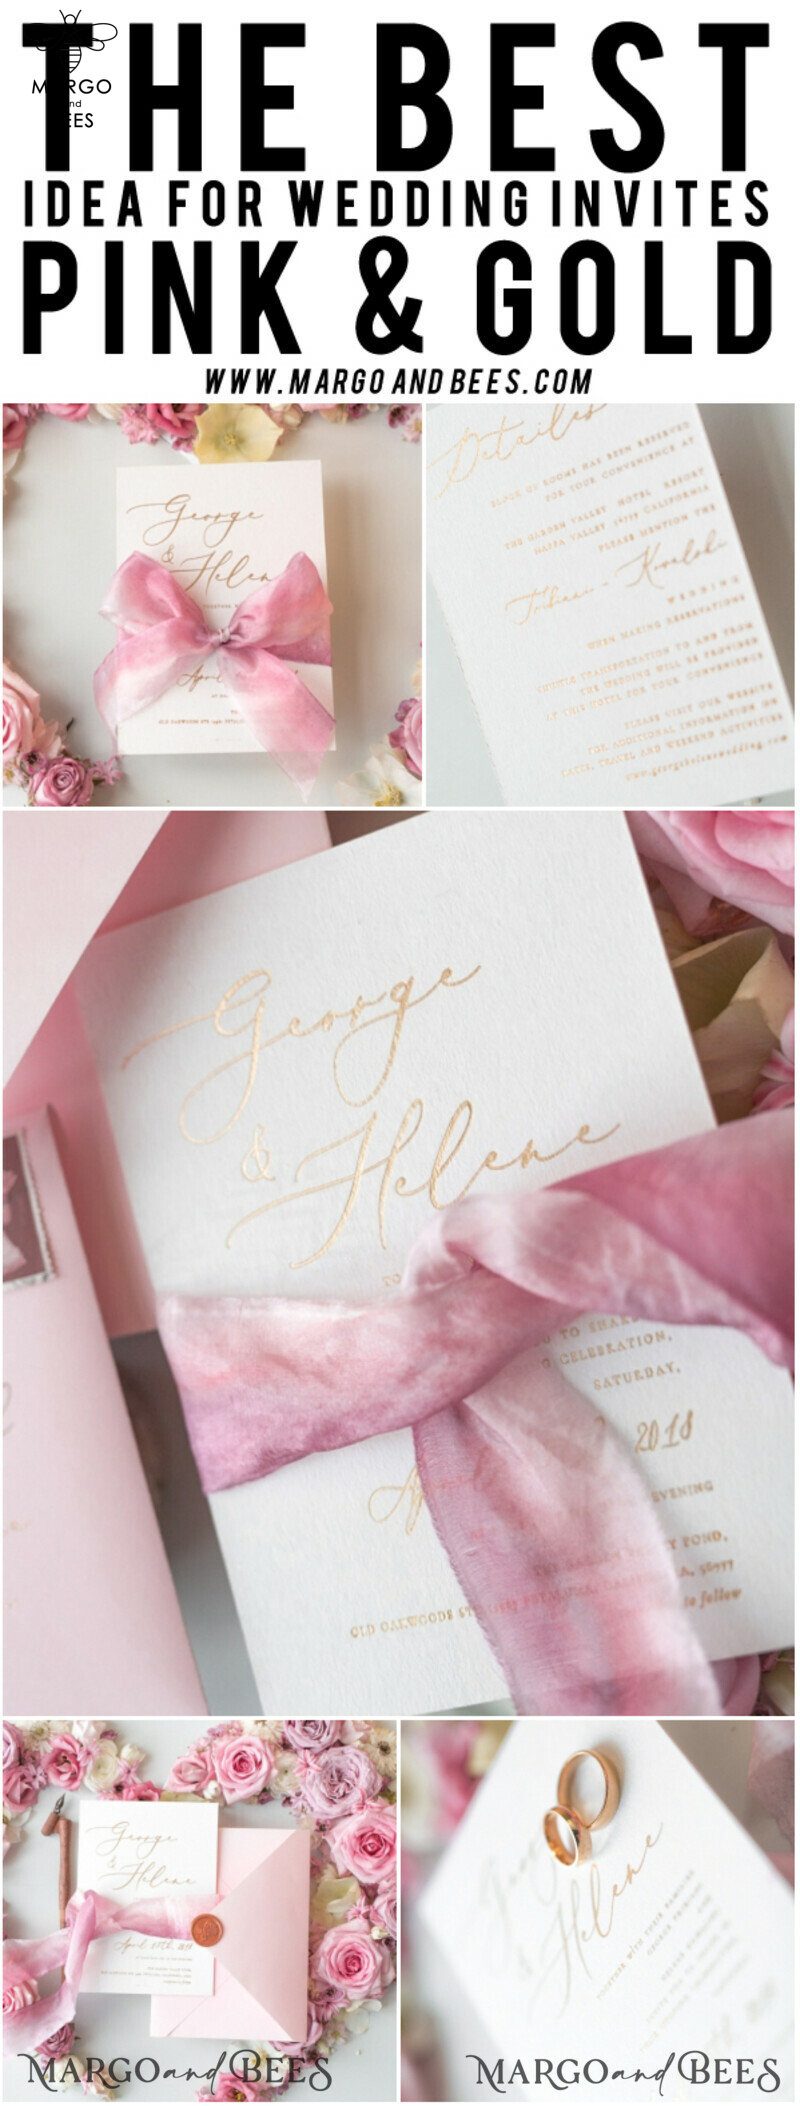 Romantic Blush Pink Wedding Invitations: Vintage Floral Suite with Elegant Hand Dyed Bow and Glamourous Peony Stationery-51